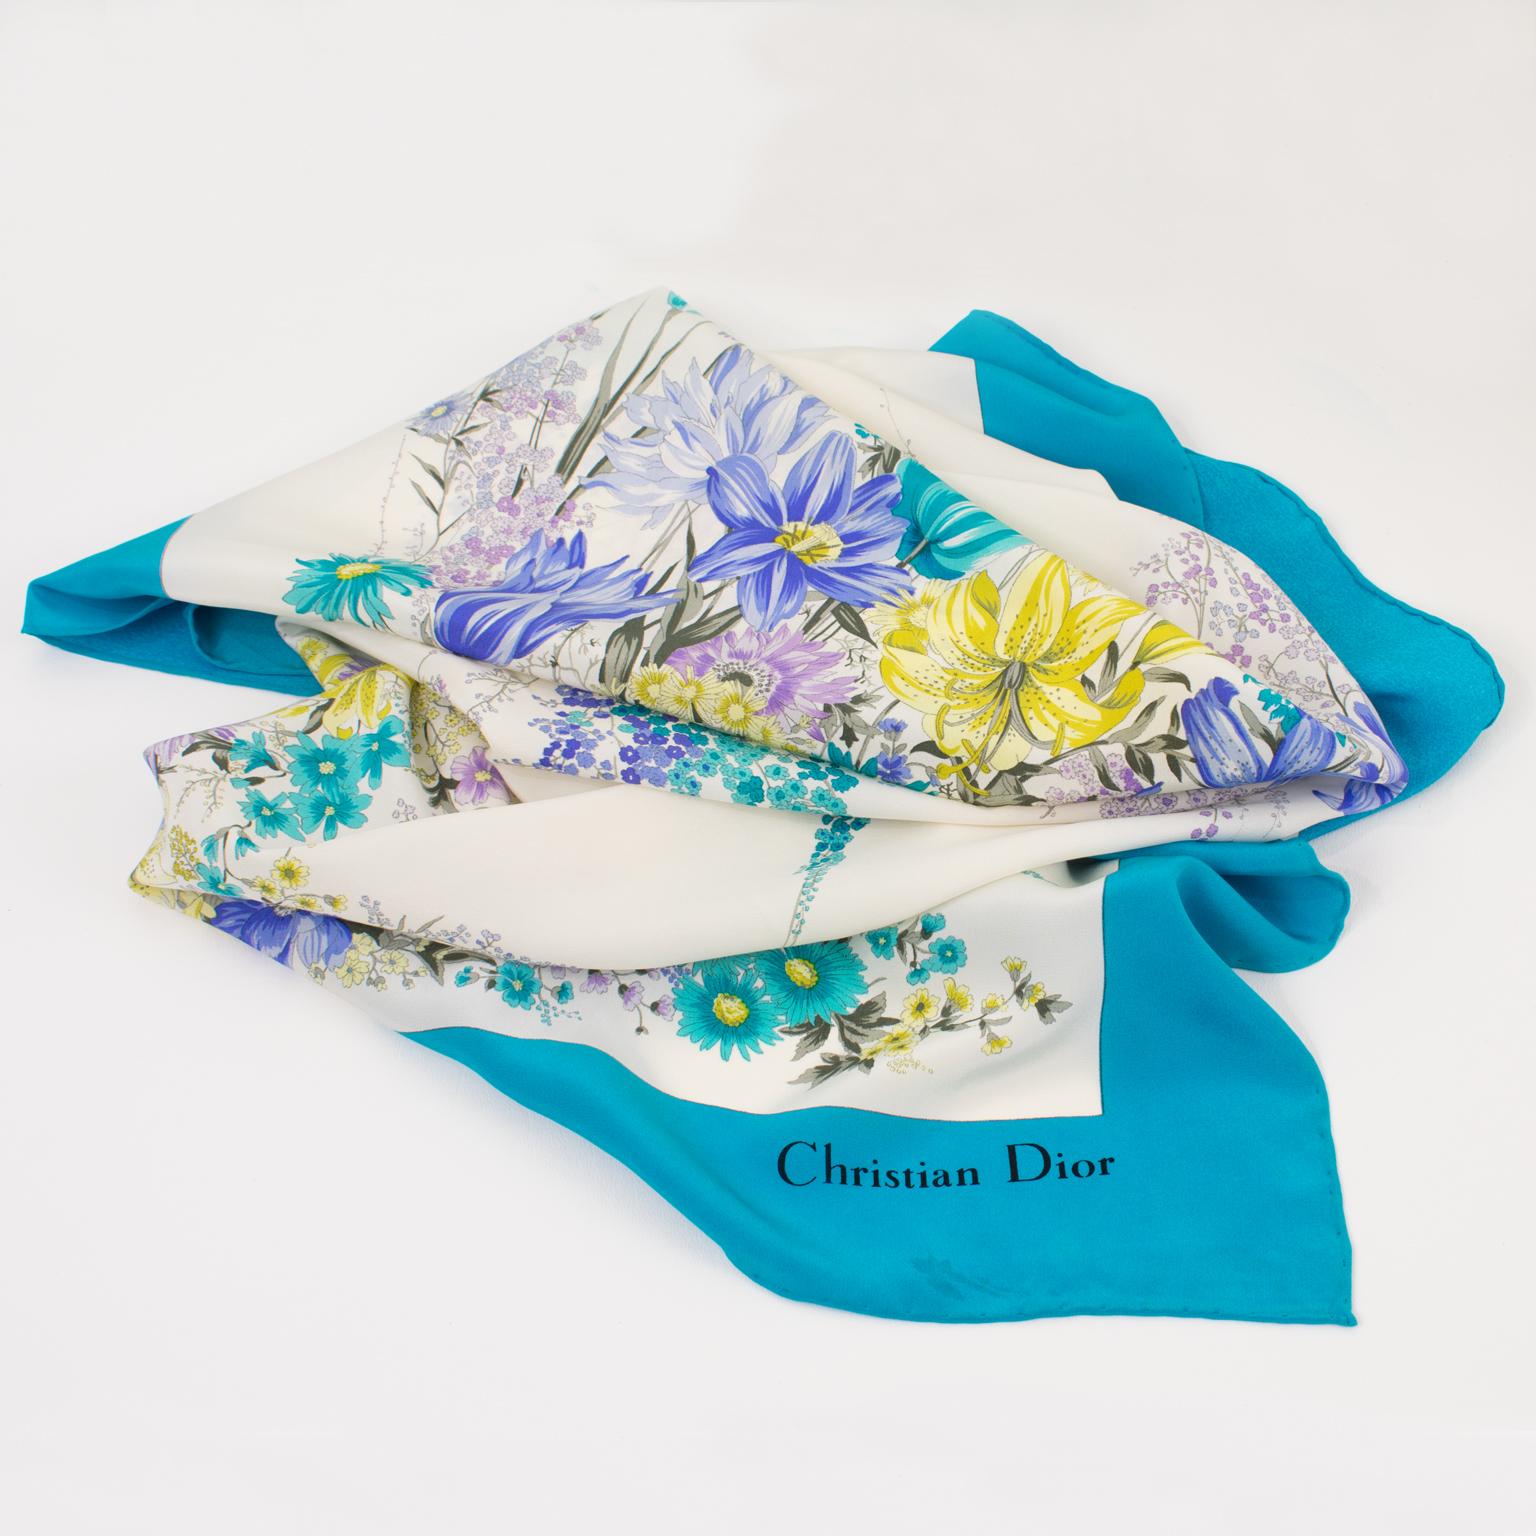 Christian Dior Paris Silk Scarf Floral Print in Blue and Lavender In Good Condition For Sale In Atlanta, GA